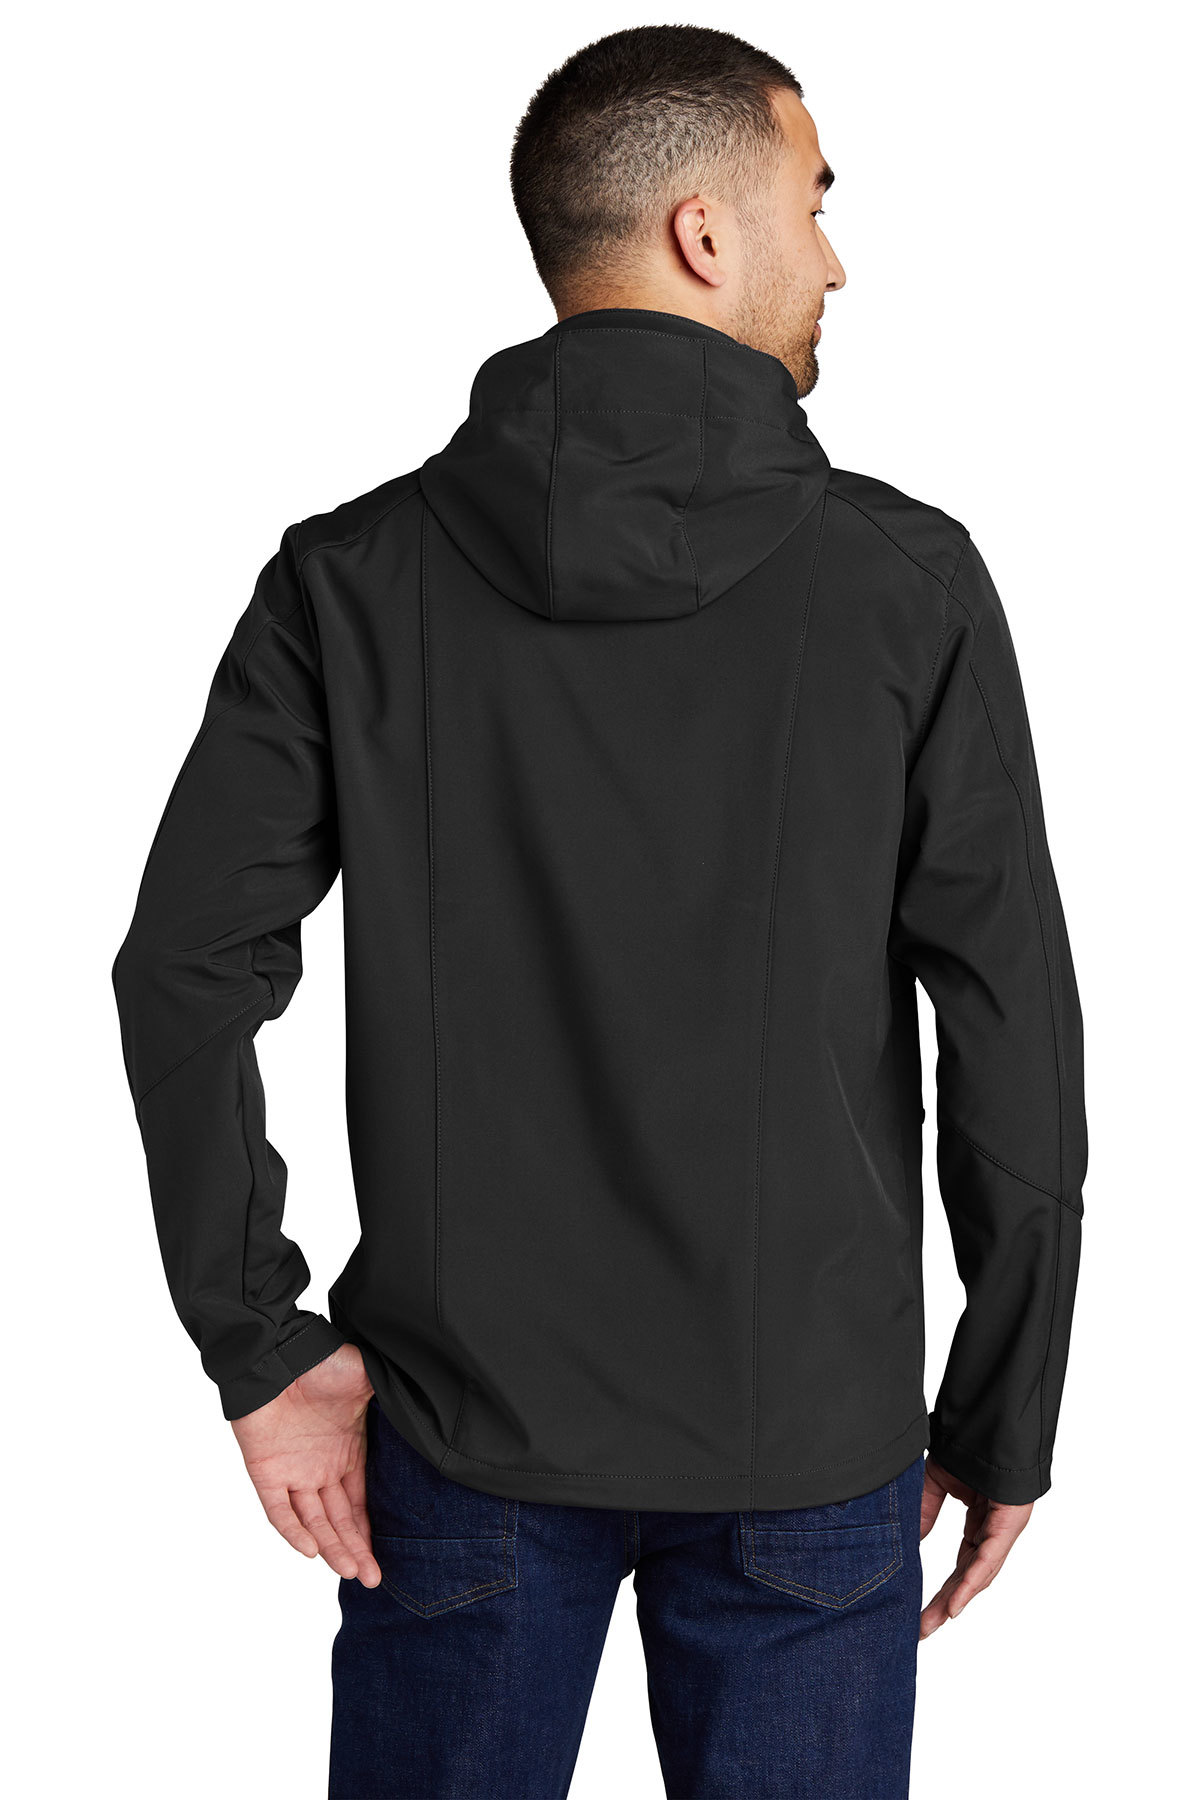 Bauer Hooded Soft Shell | Product |